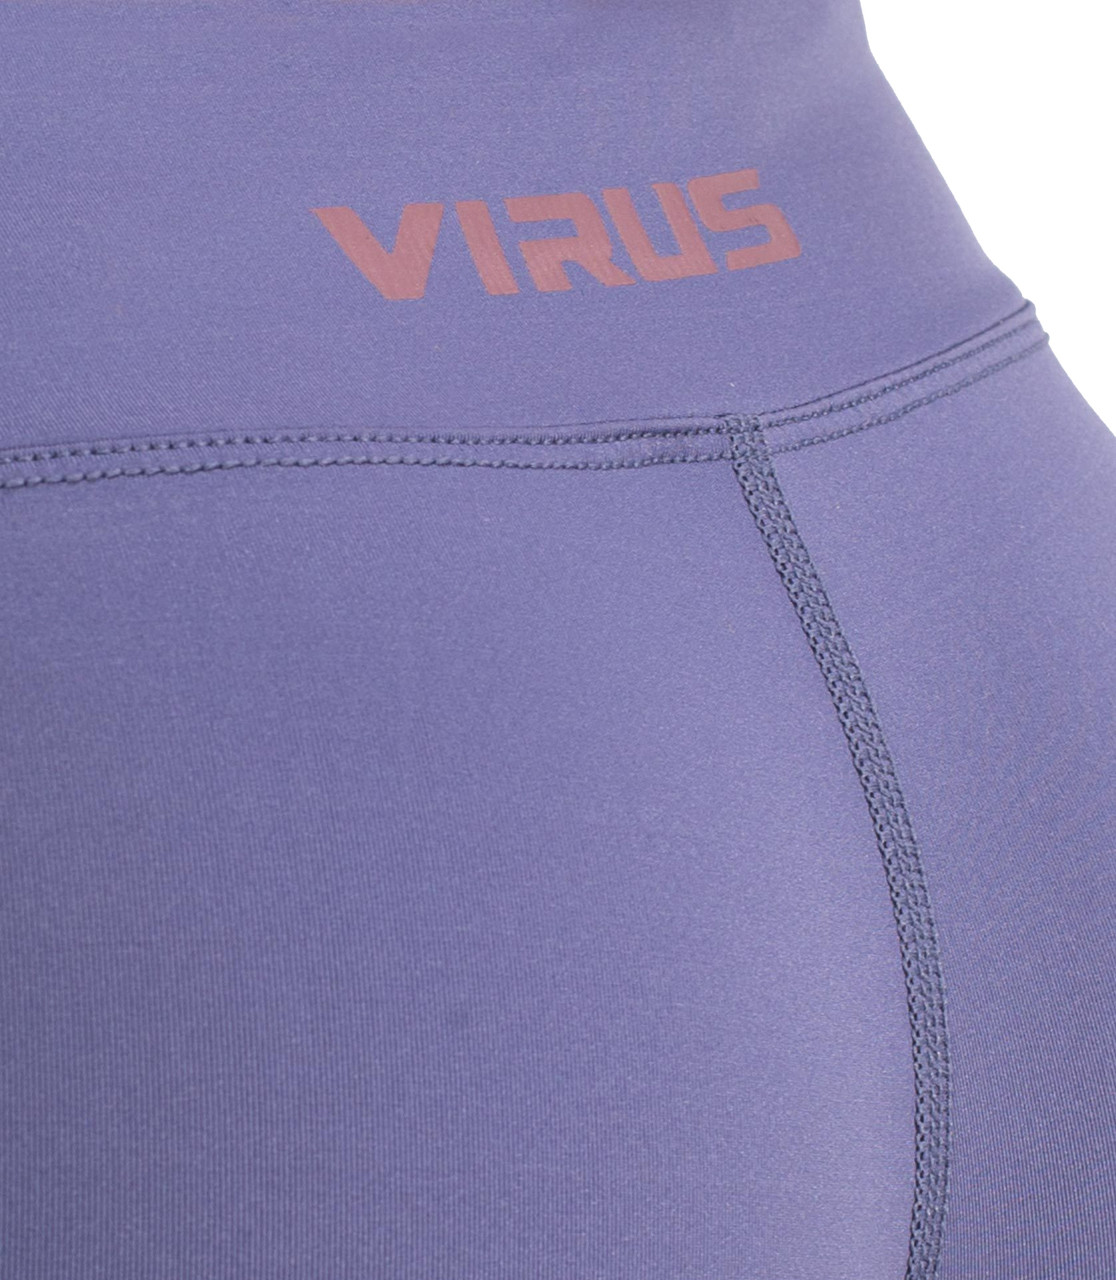 Virus Stay Cool Compression Pant Eco21